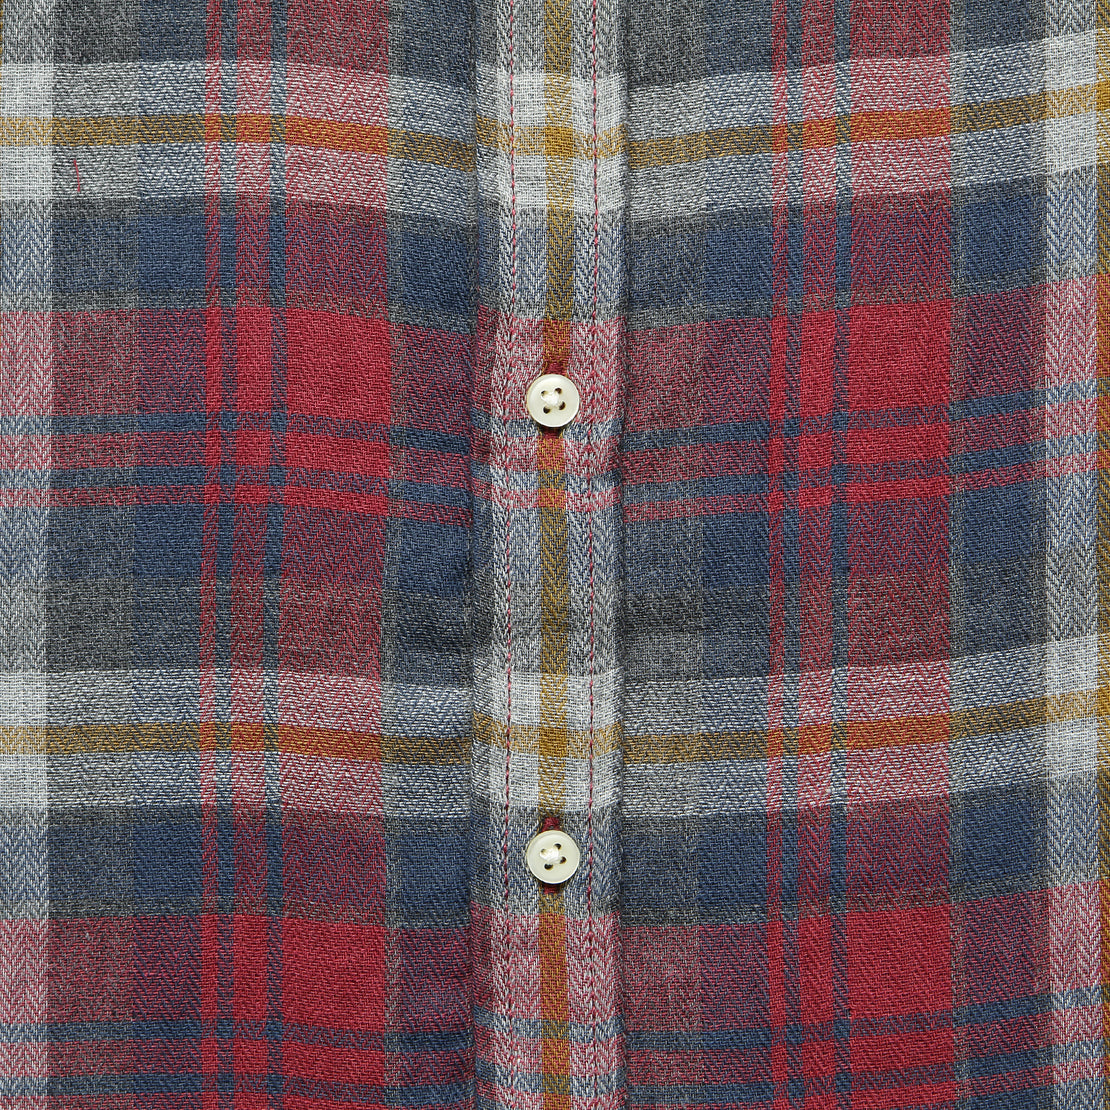 Aurora Shirt - Space Jam Red - Life After Denim - STAG Provisions - Tops - L/S Woven - Plaid